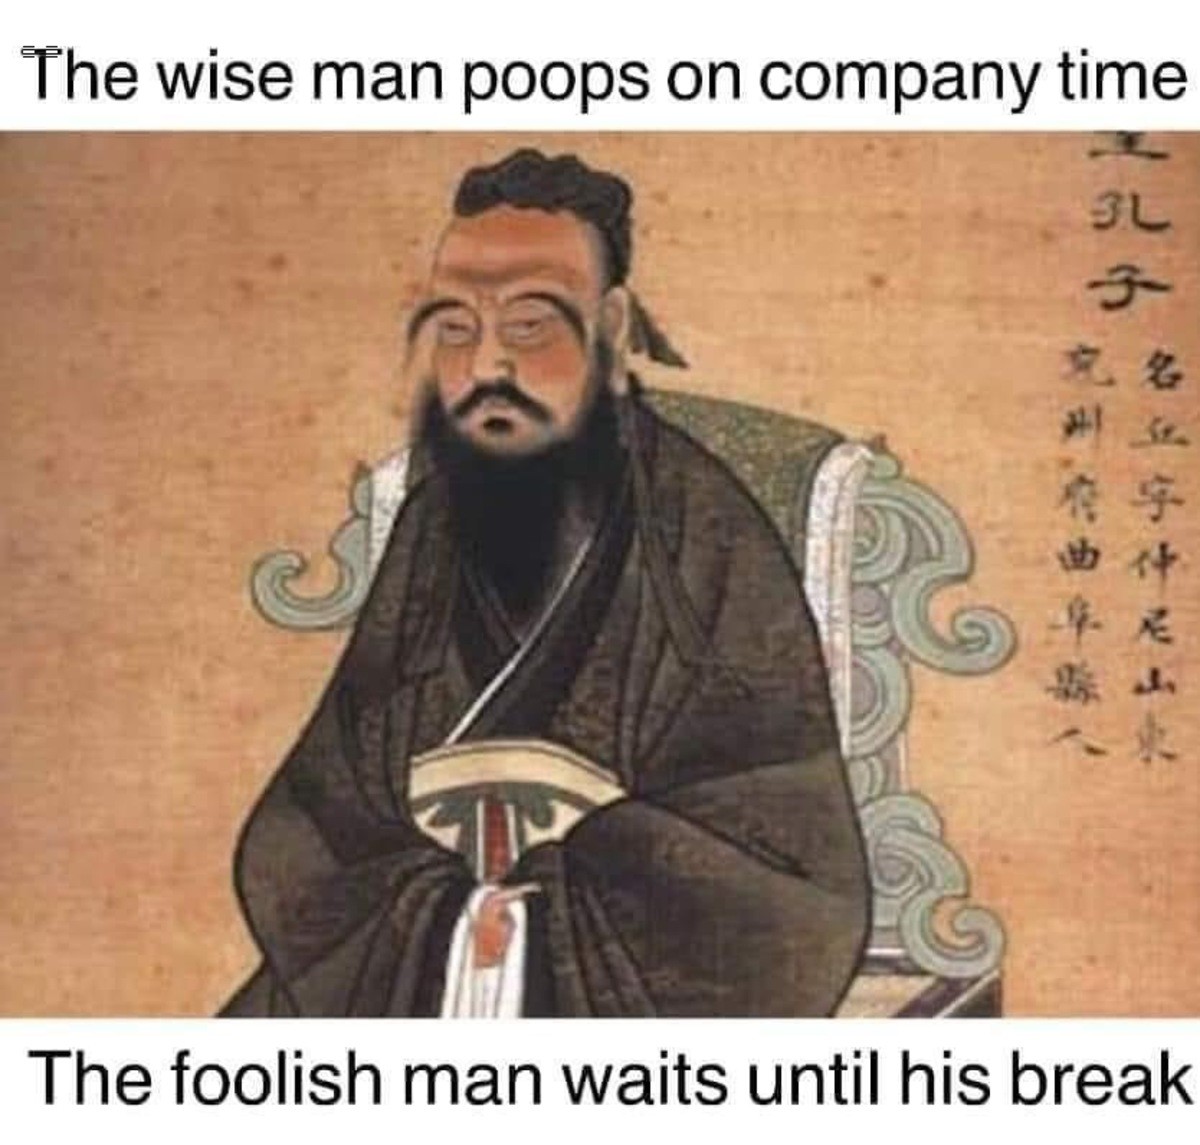 impossible Chimpanzee. .. The wise man poops exactly when he feels like it is optimal. On break? On the clock? In line at the bank? Doesn't matter